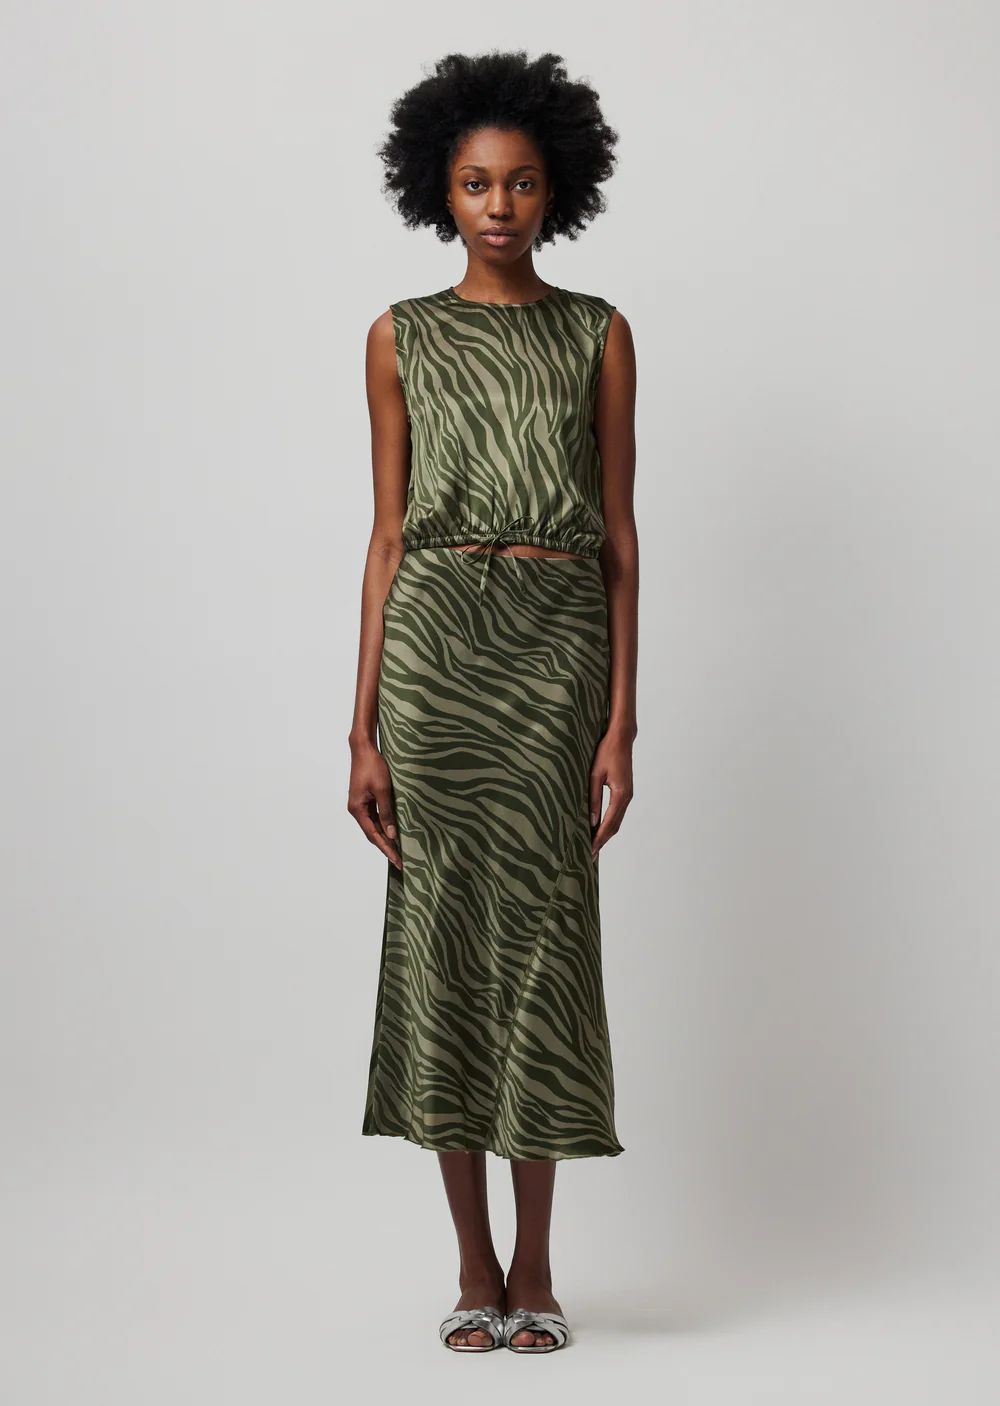 Silk Charmeuse with Zebra Stripe Maxi Skirt - Army Combo | ATM Collection